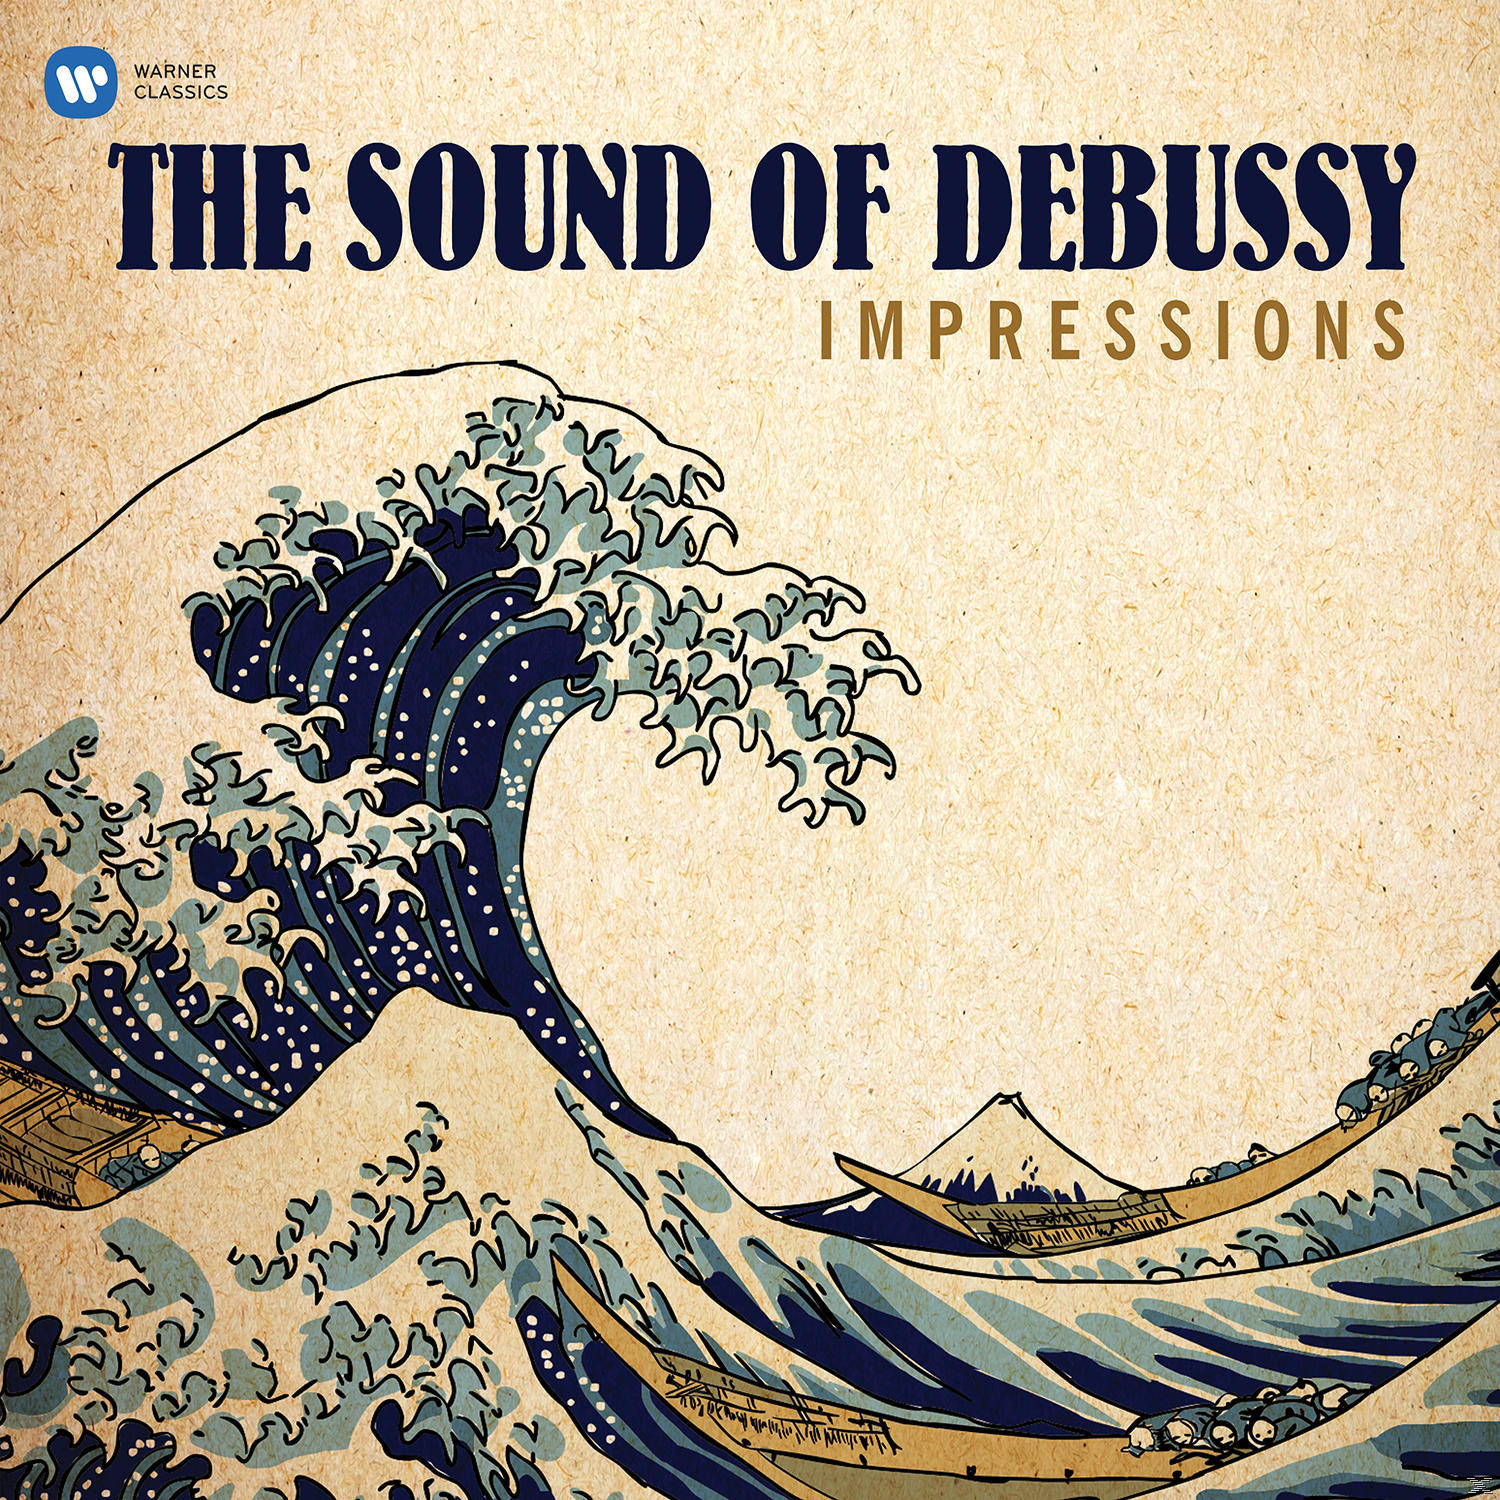 VARIOUS - Impressions: The - Sound Debussy of (Vinyl)